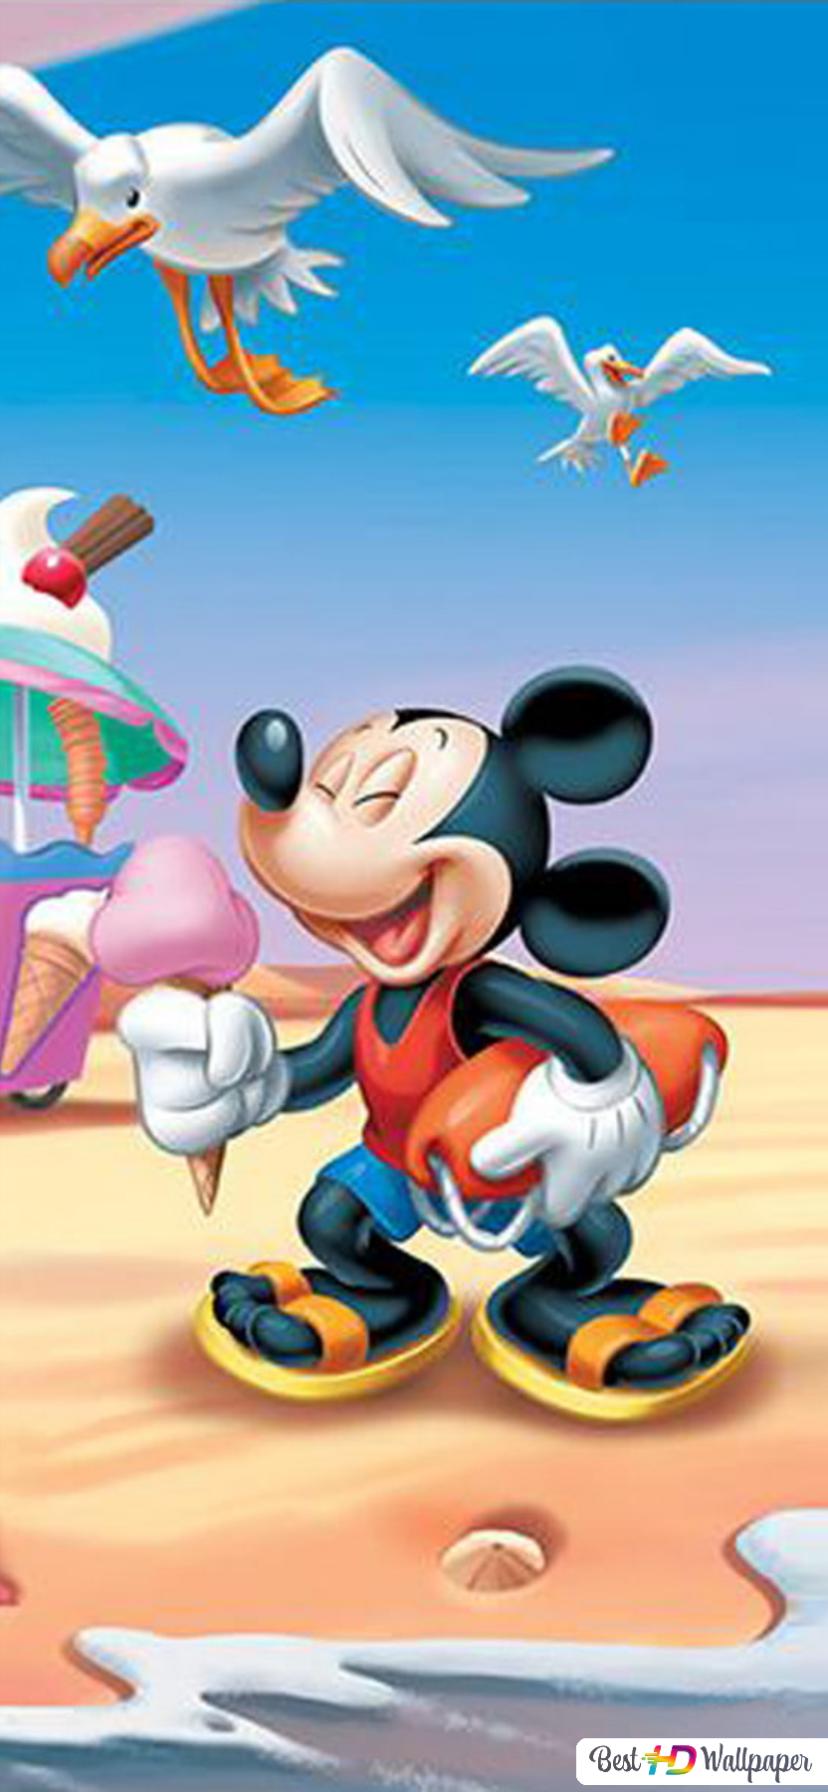 Donald duck and mickey mouse summer vacation beach HD wallpaper download